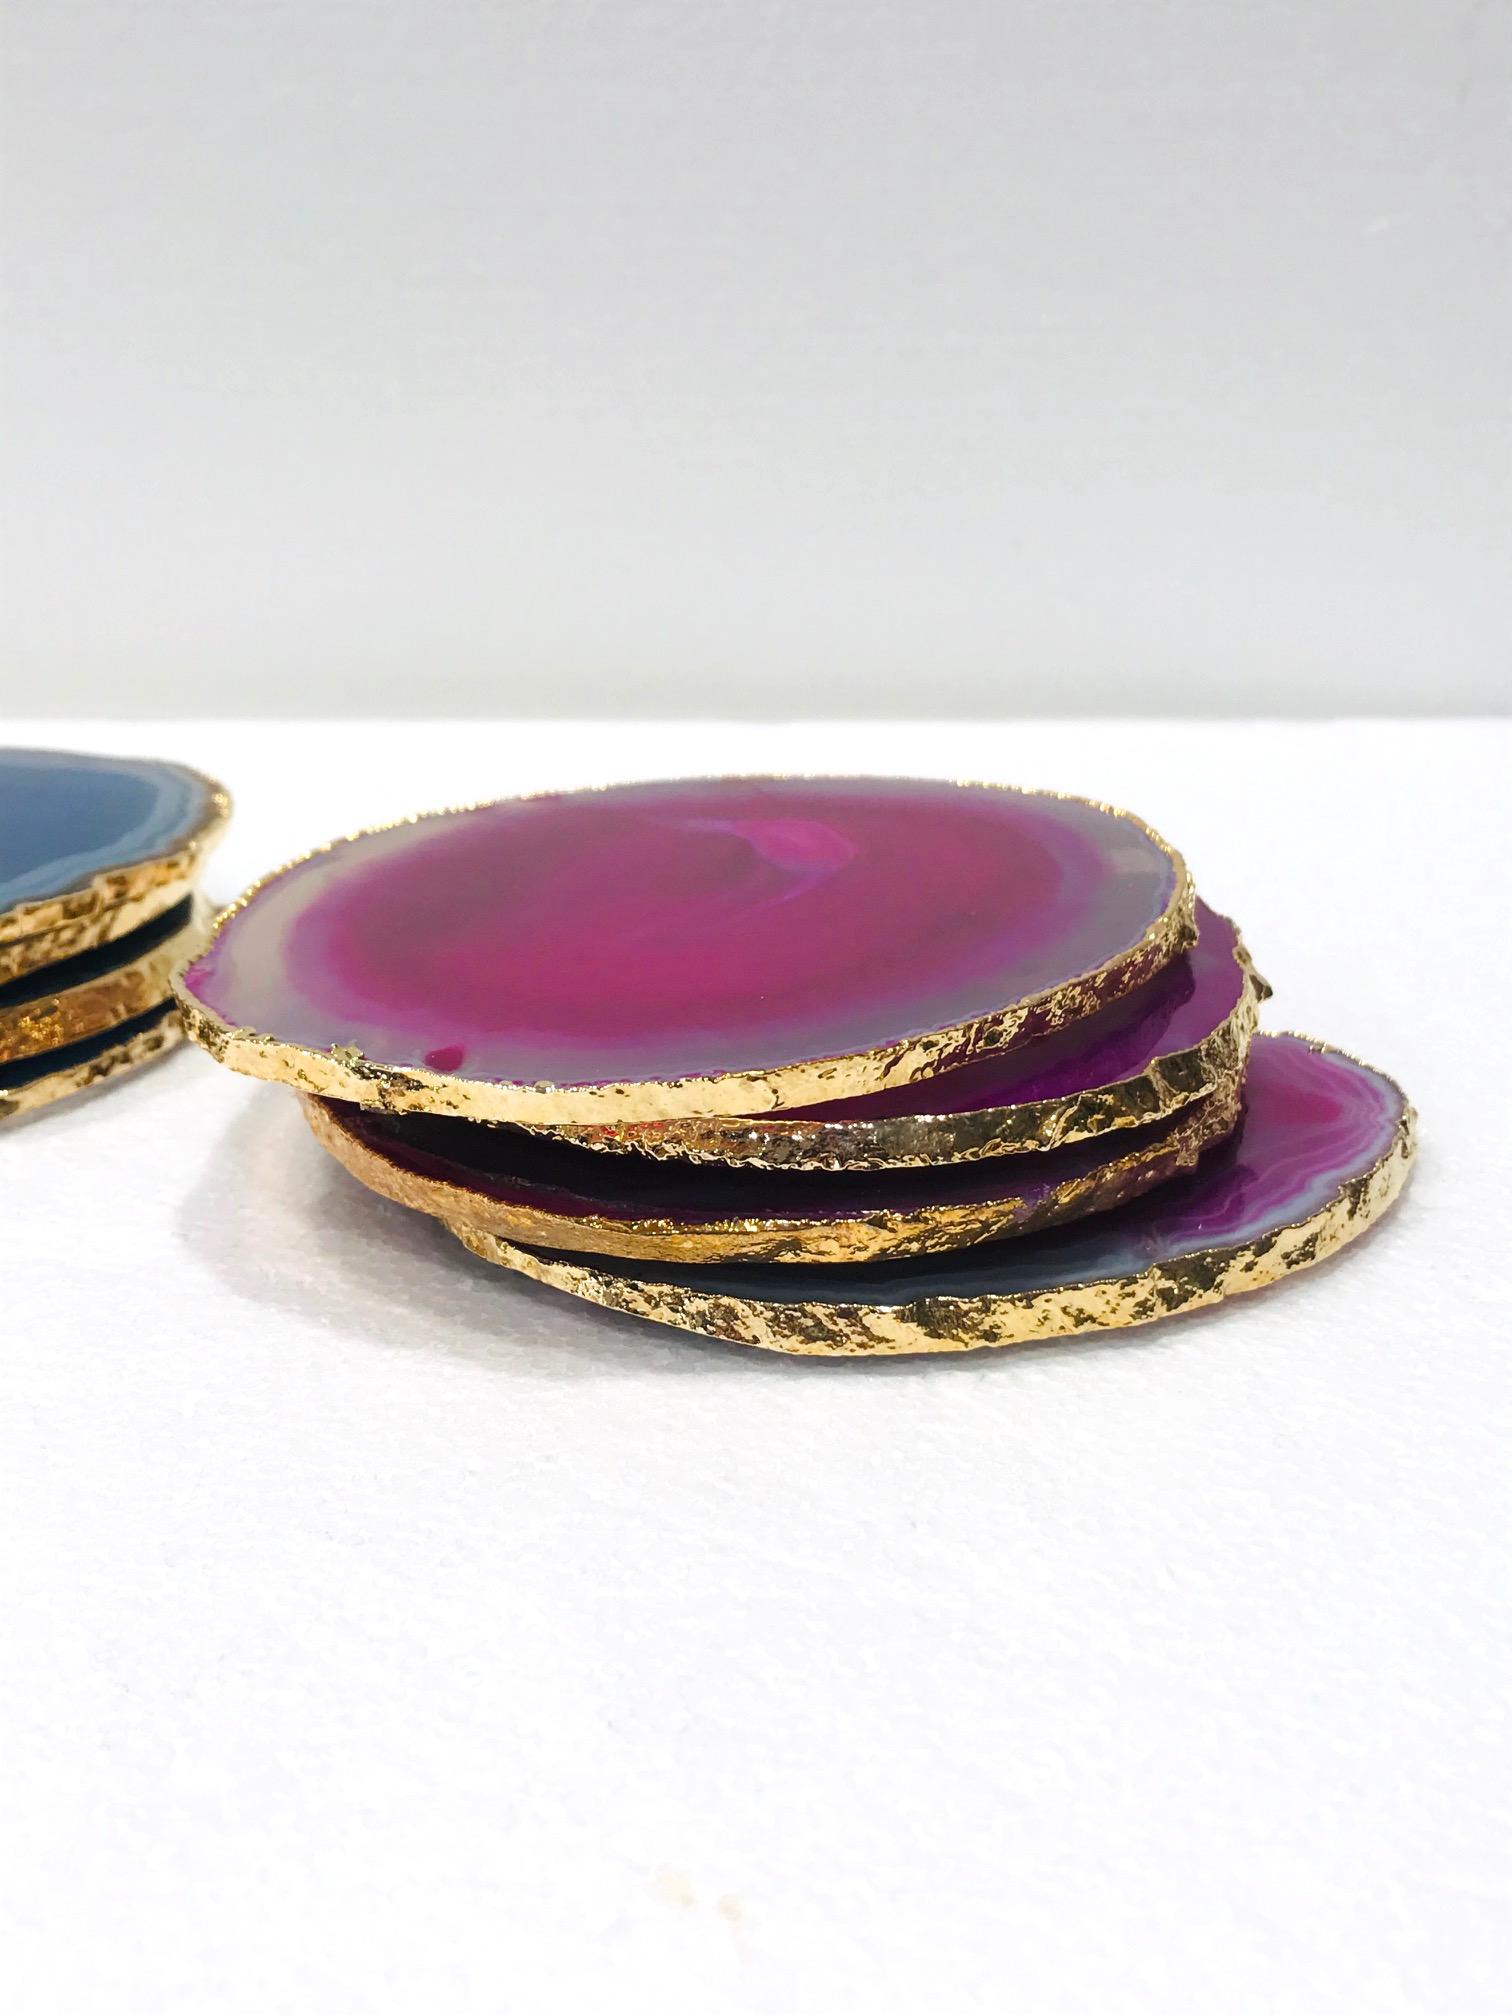 Gold Plate Set/ 8 Semi-Precious Gemstone Coasters in Pink and Turquoise with 24K Gold Trim